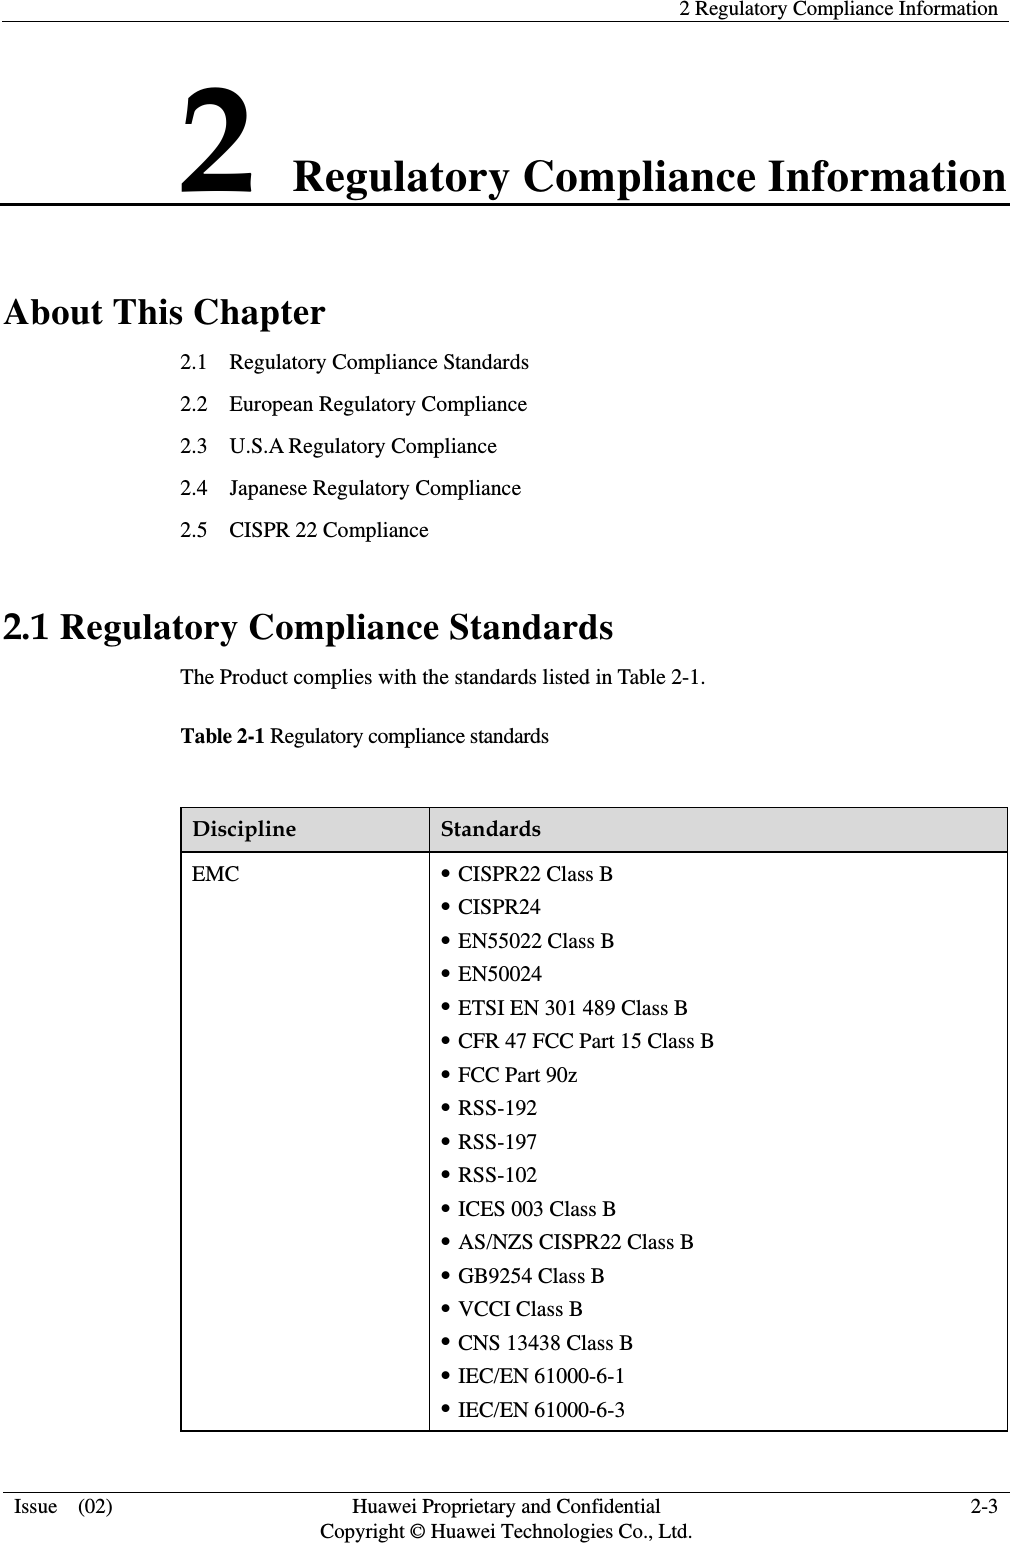    2 Regulatory Compliance Information  Issue  (02)  Huawei Proprietary and Confidential     Copyright © Huawei Technologies Co., Ltd. 2-3 2 Regulatory Compliance Information About This Chapter 2.1    Regulatory Compliance Standards 2.2  European Regulatory Compliance 2.3  U.S.A Regulatory Compliance 2.4  Japanese Regulatory Compliance 2.5    CISPR 22 Compliance 2.1 Regulatory Compliance Standards The Product complies with the standards listed in Table 2-1. Table 2-1 Regulatory compliance standards  Discipline  Standards EMC  z CISPR22 Class B z CISPR24 z EN55022 Class B z EN50024 z ETSI EN 301 489 Class B z CFR 47 FCC Part 15 Class B z FCC Part 90z z RSS-192 z RSS-197 z RSS-102 z ICES 003 Class B z AS/NZS CISPR22 Class B z GB9254 Class B z VCCI Class B z CNS 13438 Class B z IEC/EN 61000-6-1 z IEC/EN 61000-6-3 